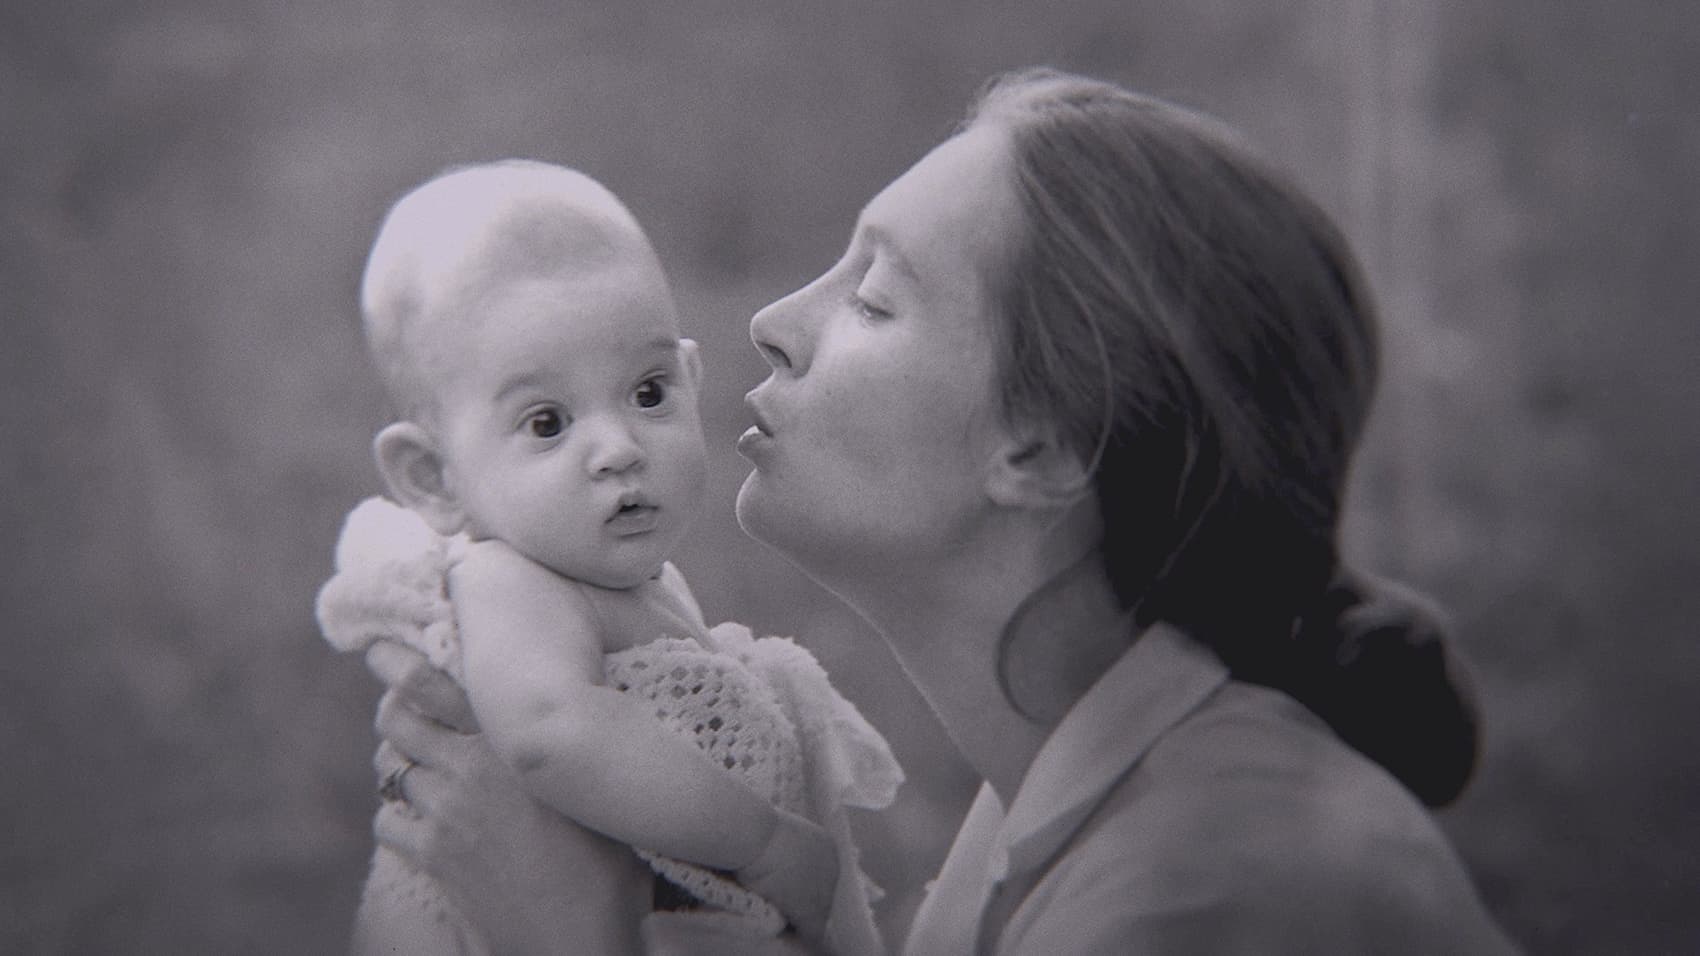 Jane Goodall Reflects On Her Younger Self, As Seen In Recently Discovered Footage | Here & Now